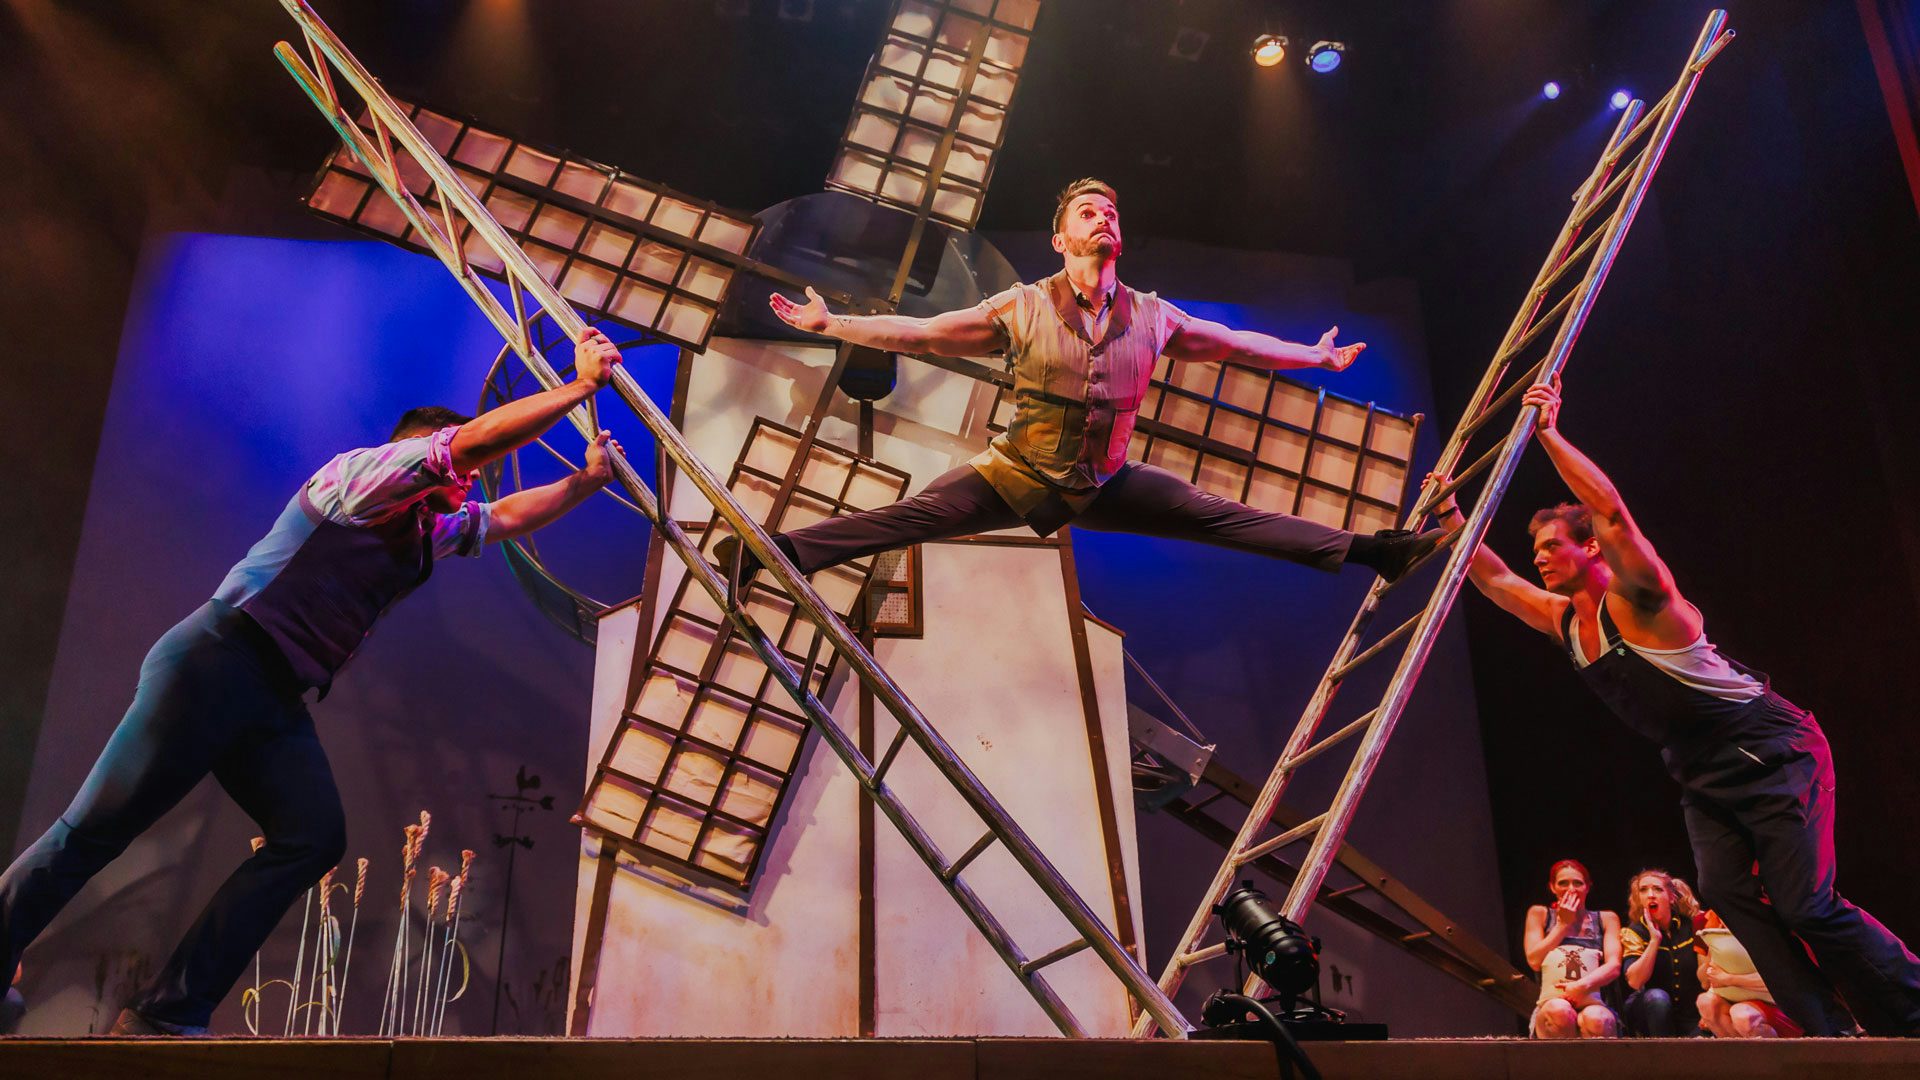 A man balancing himself between two ladders leaning outwards that are being supported by two other men. Two women in the background gasp in astonishment.